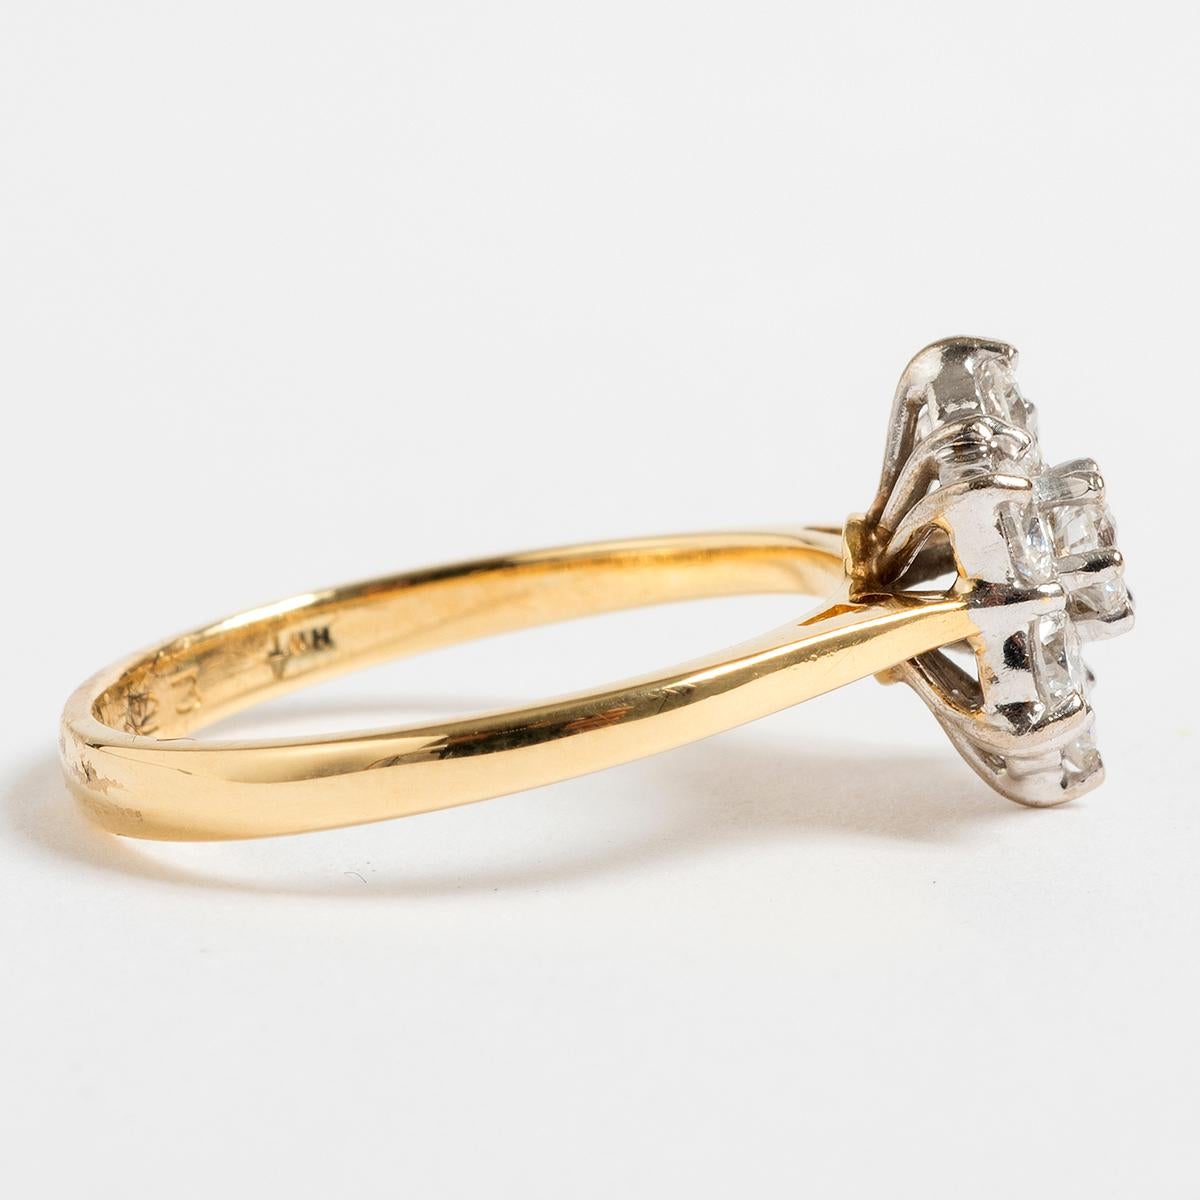 A unique piece within our carefully curated Vintage & Prestige fine jewellery collection, we are delighted to present the following:

This pretty diamond ring is set within 18K Yellow Gold and UK size N US Size 6.5. Diamonds are Est 0.70ct.